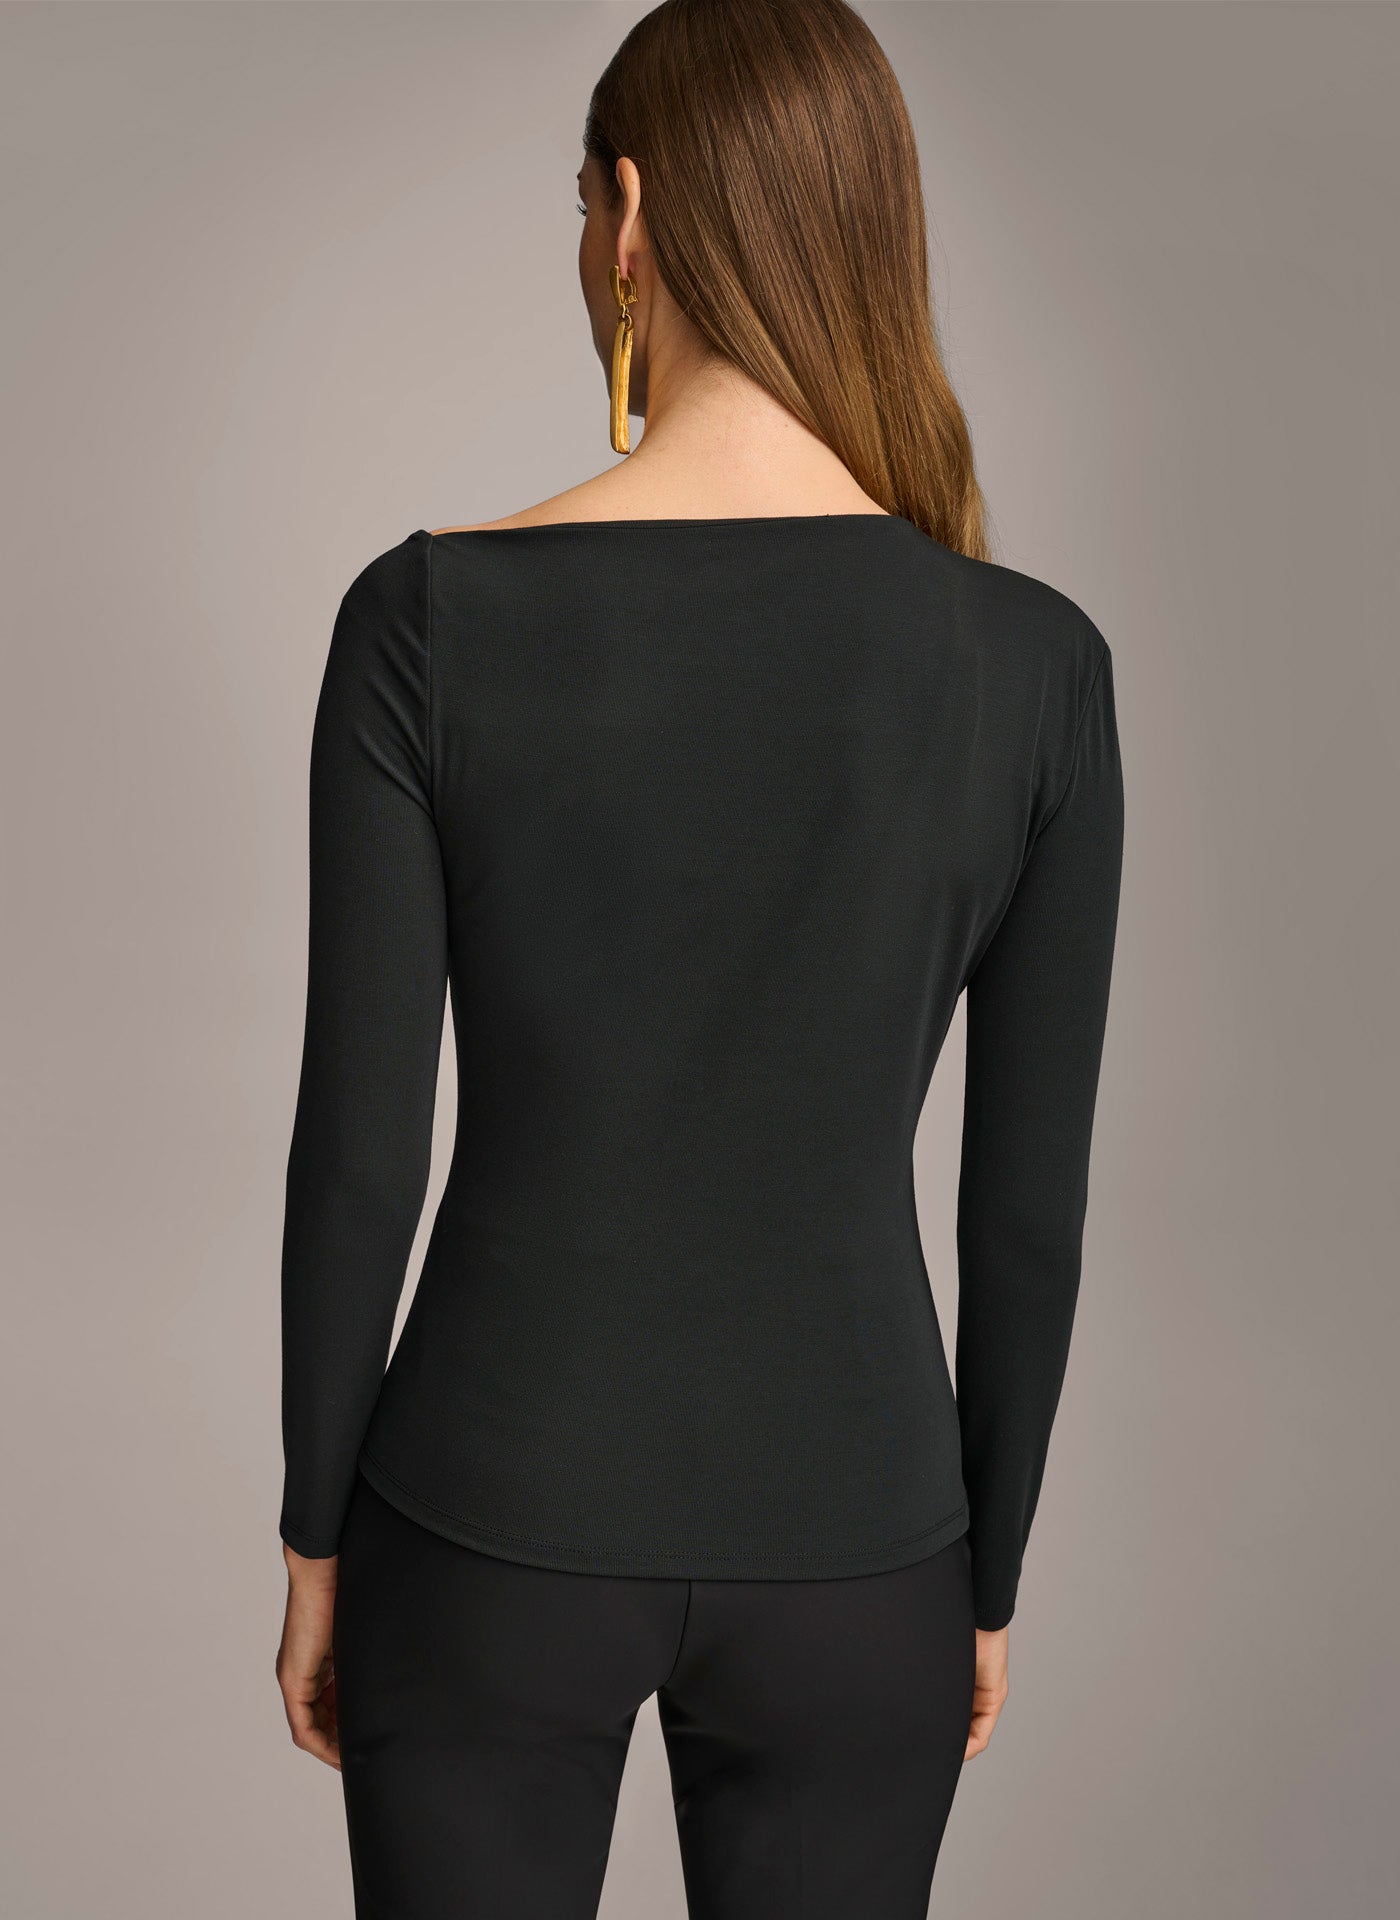 ASYMMETRICAL NECKLINE FITTED TOP